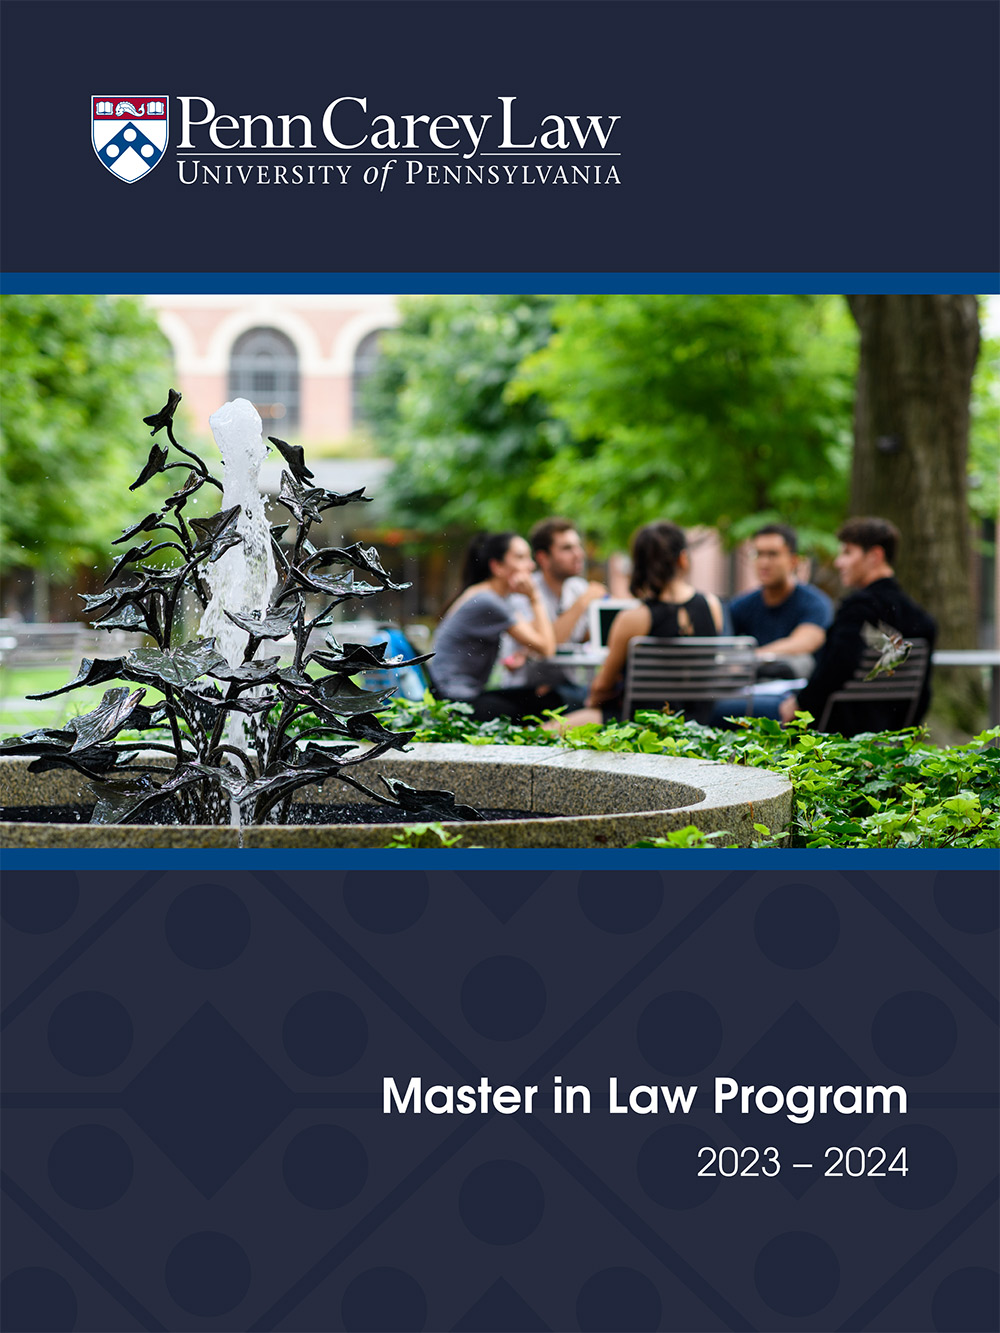 Penn Carey Law Master in Law Degree Viewbook 2023-2024 cover